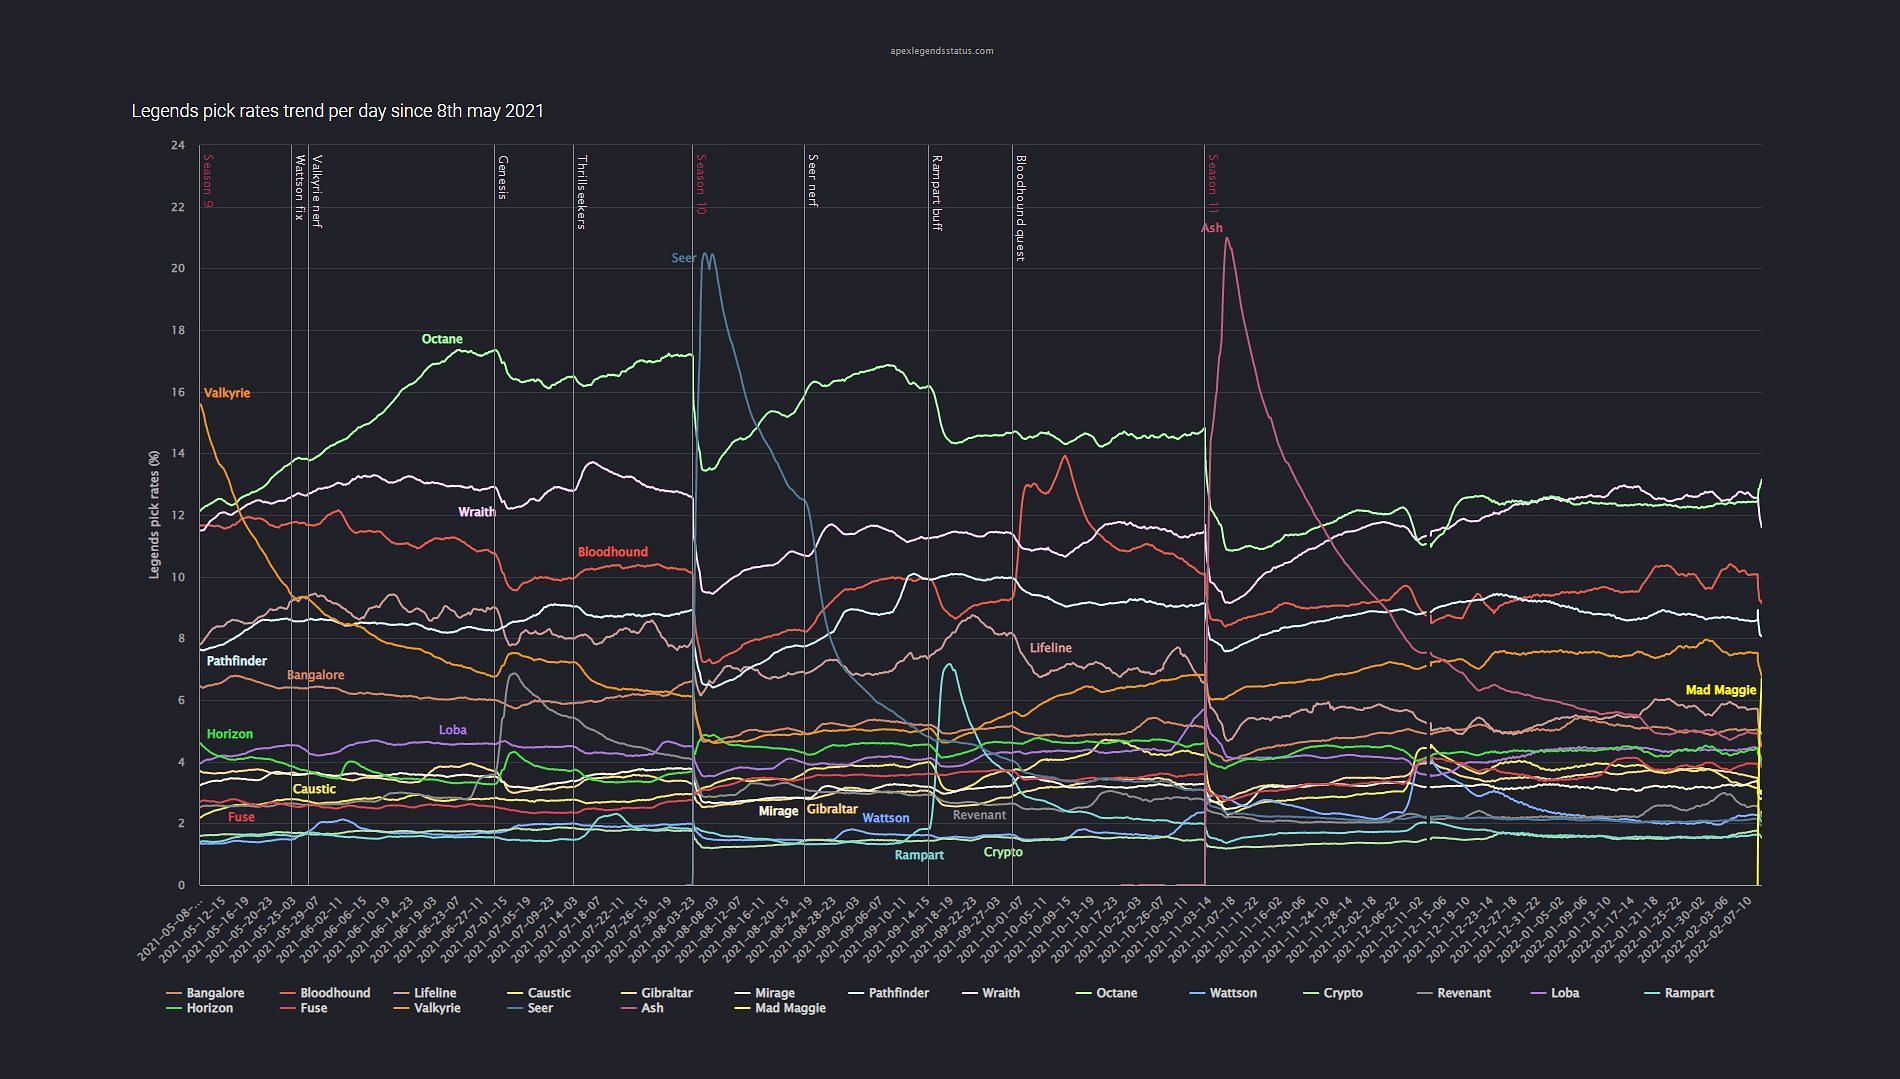 Legends pick rates trend per day since May 8, 2021 (Image via Respawn Entertainment)